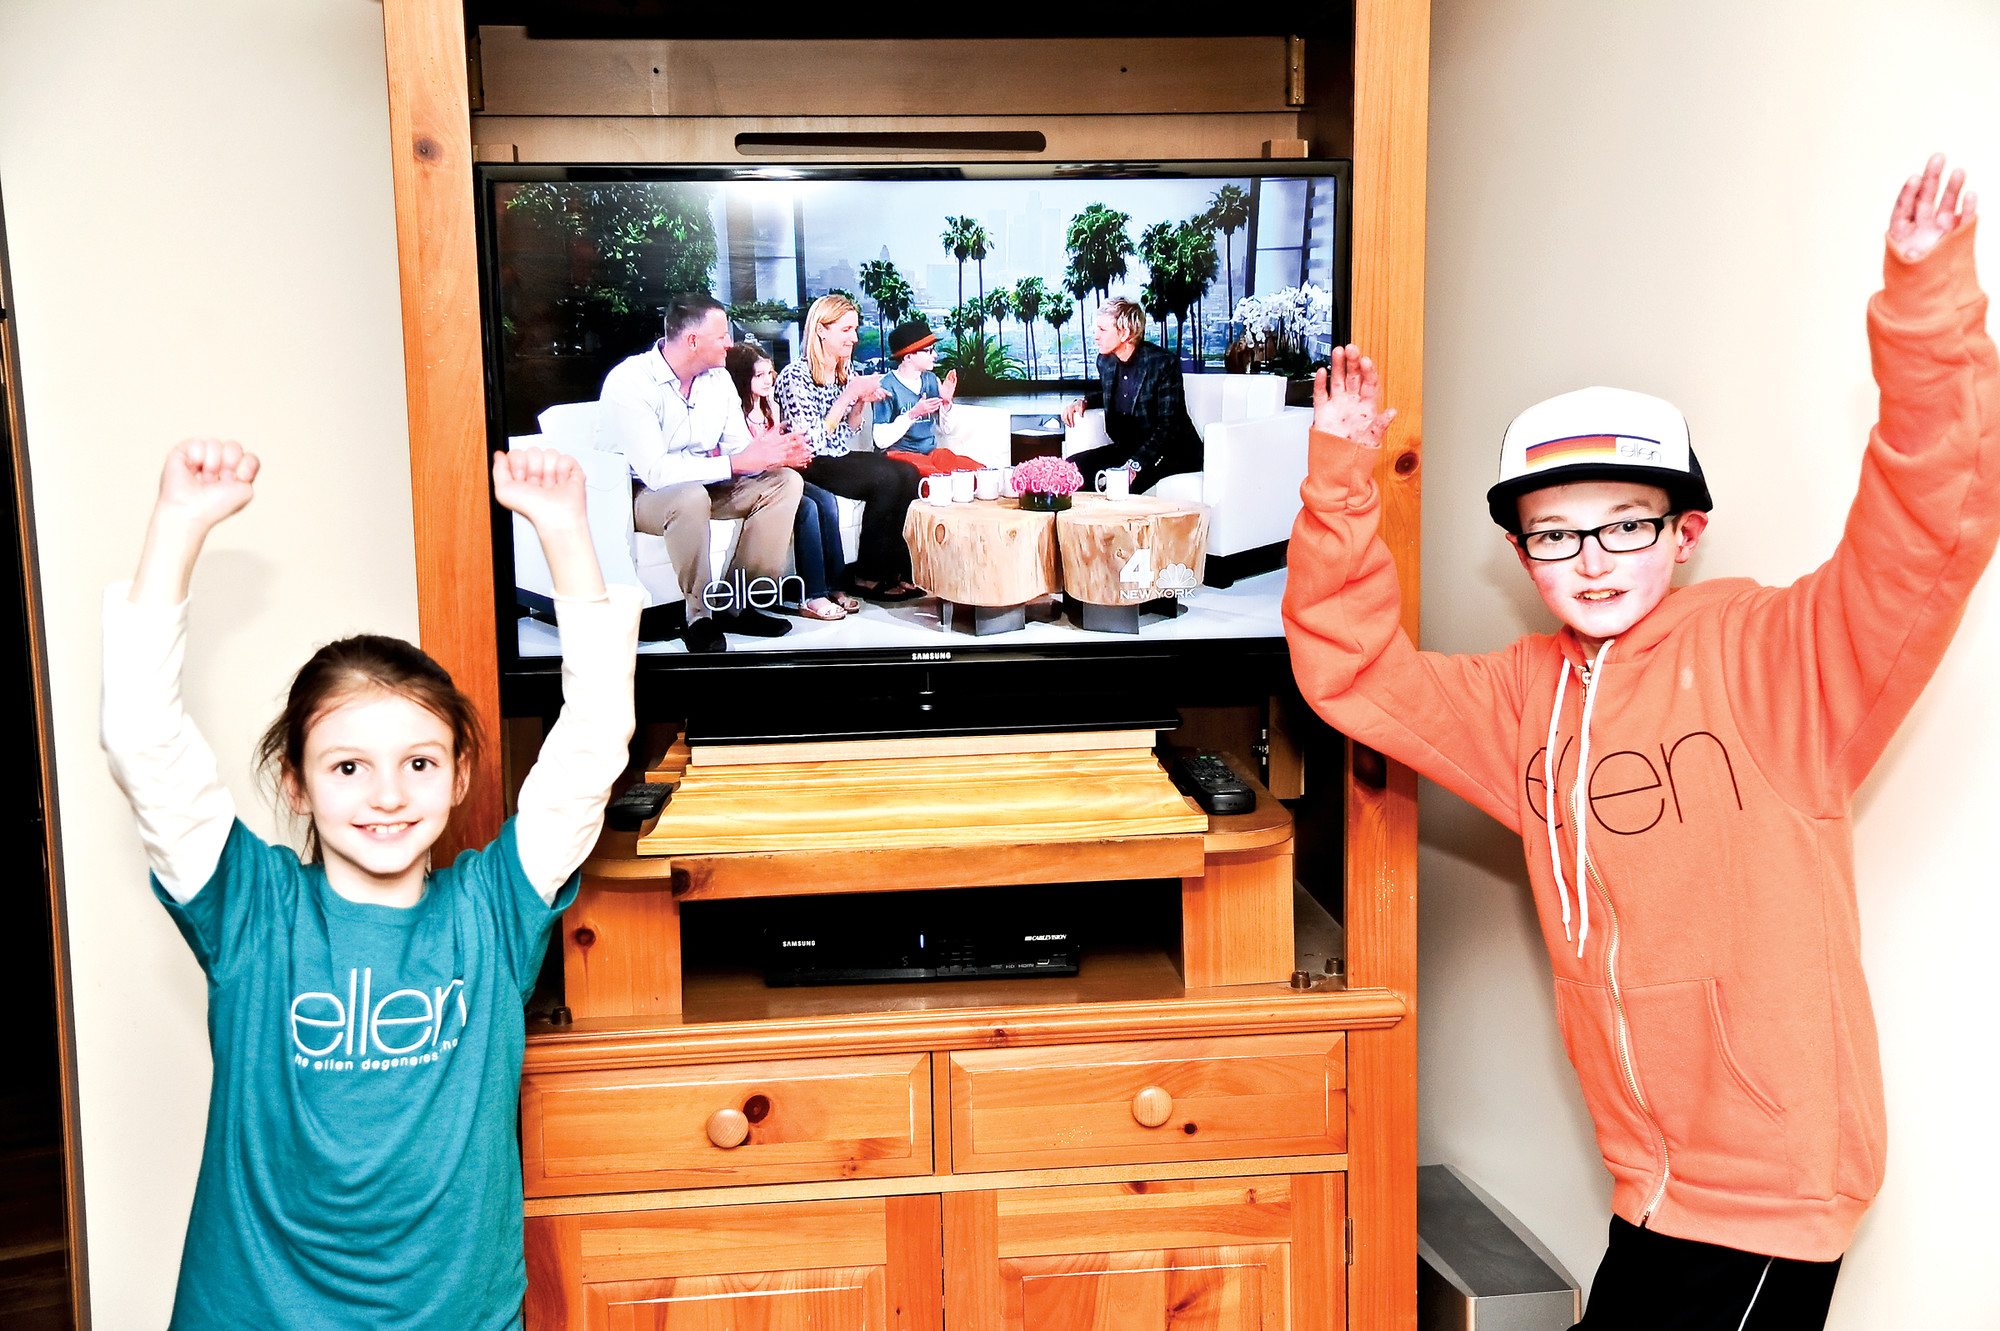 Robbie Twible, 12, and his sister, Allison, 7, celebrated as they watched themselves on “The Ellen DeGeneres Show” on Monday.